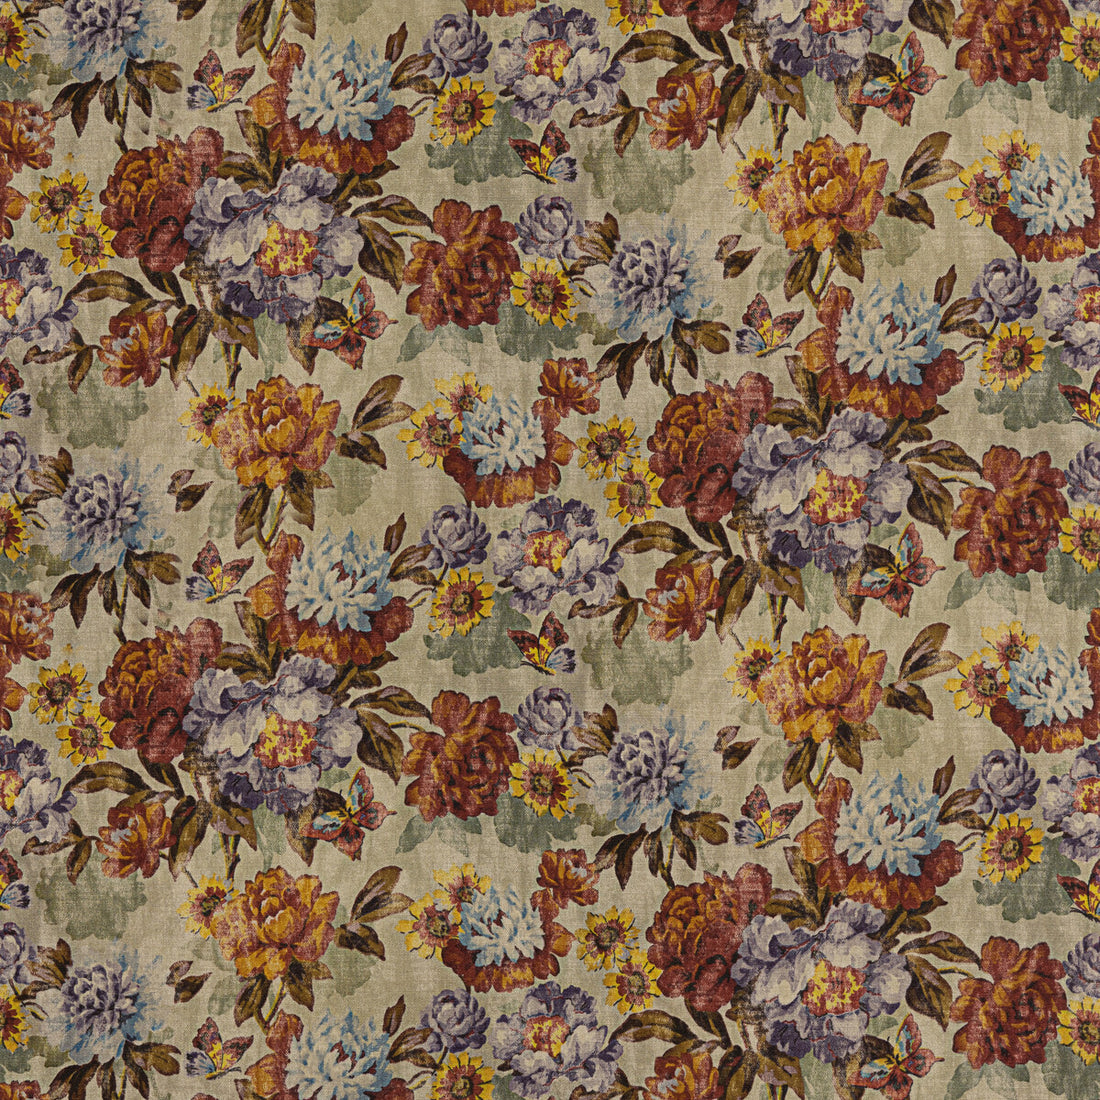 Botanica fabric in red/plum color - pattern FD306.V54.0 - by Mulberry in the Modern Country II collection